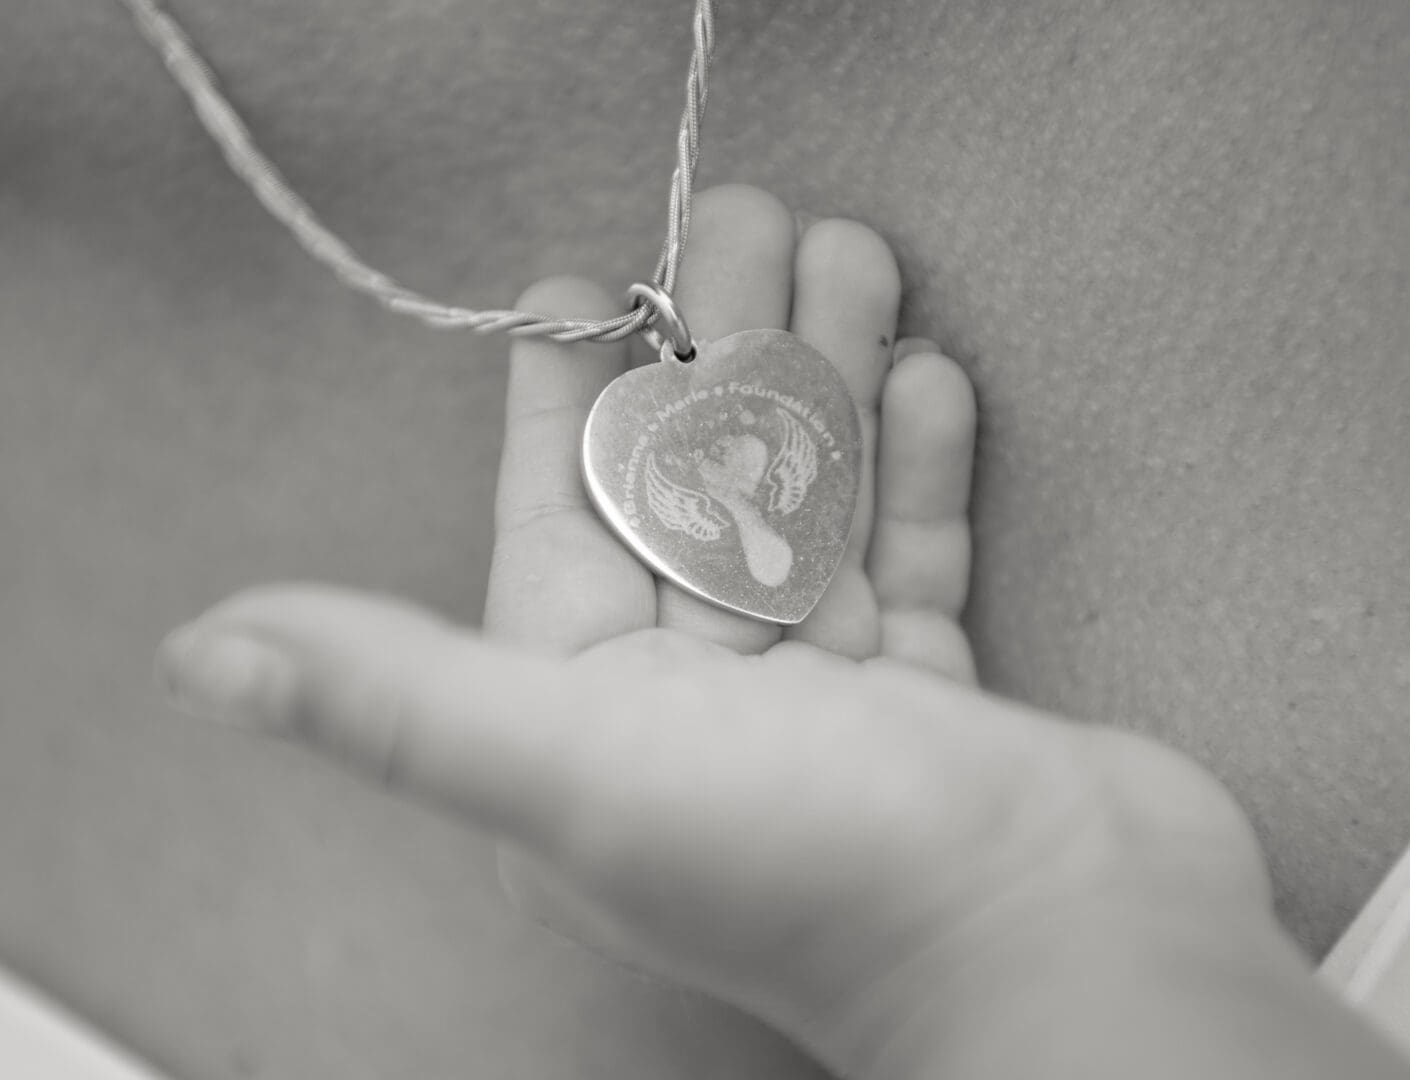 A child 's hand holding a heart shaped necklace.